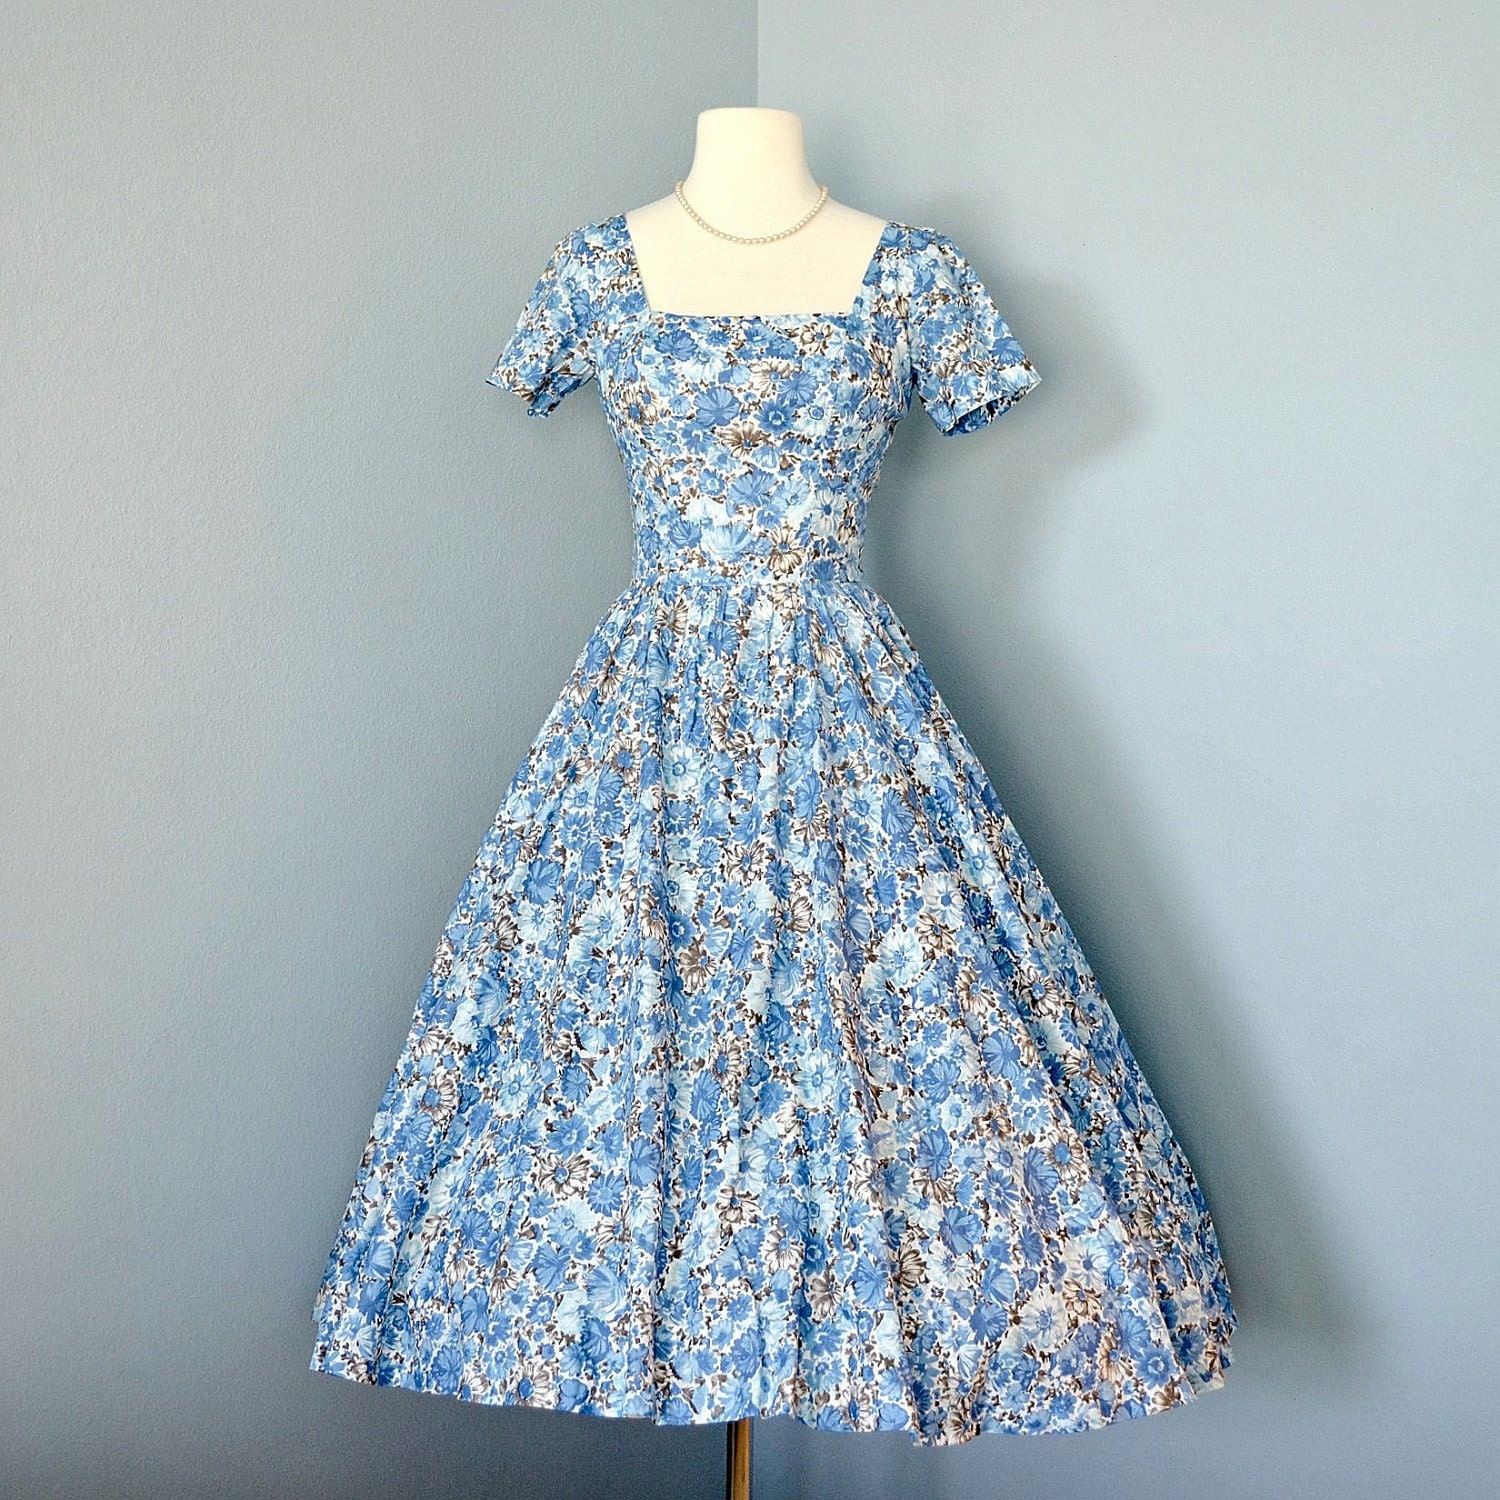 Vintage Cotton Day Dress...Lovely 1950s/1960s Cotton Blue and